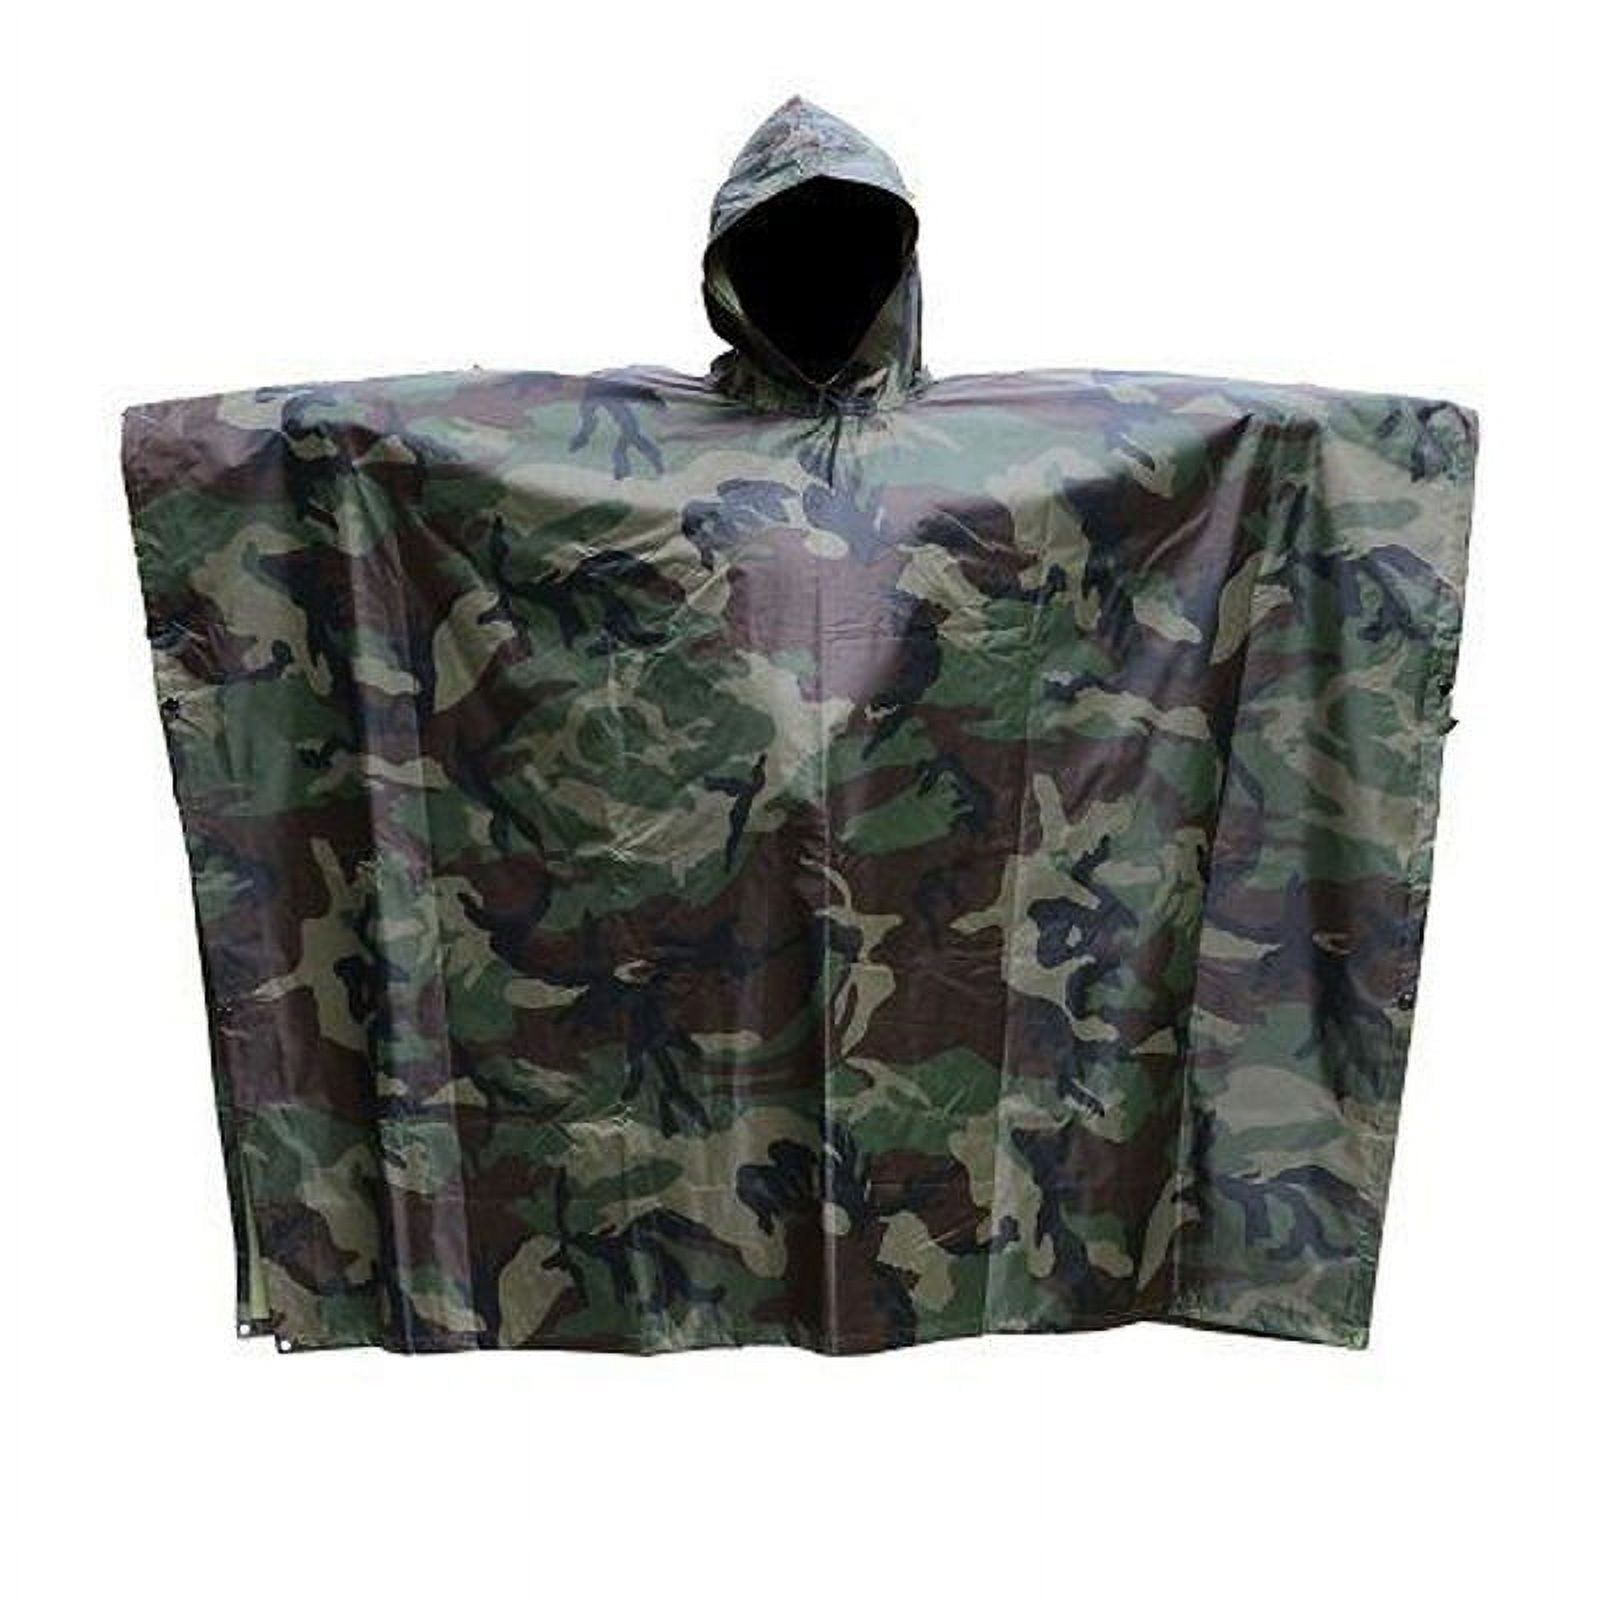 Army Combat Military Festival Poncho BTP Camo Waterproof Rain Cover Jacket - image 2 of 5